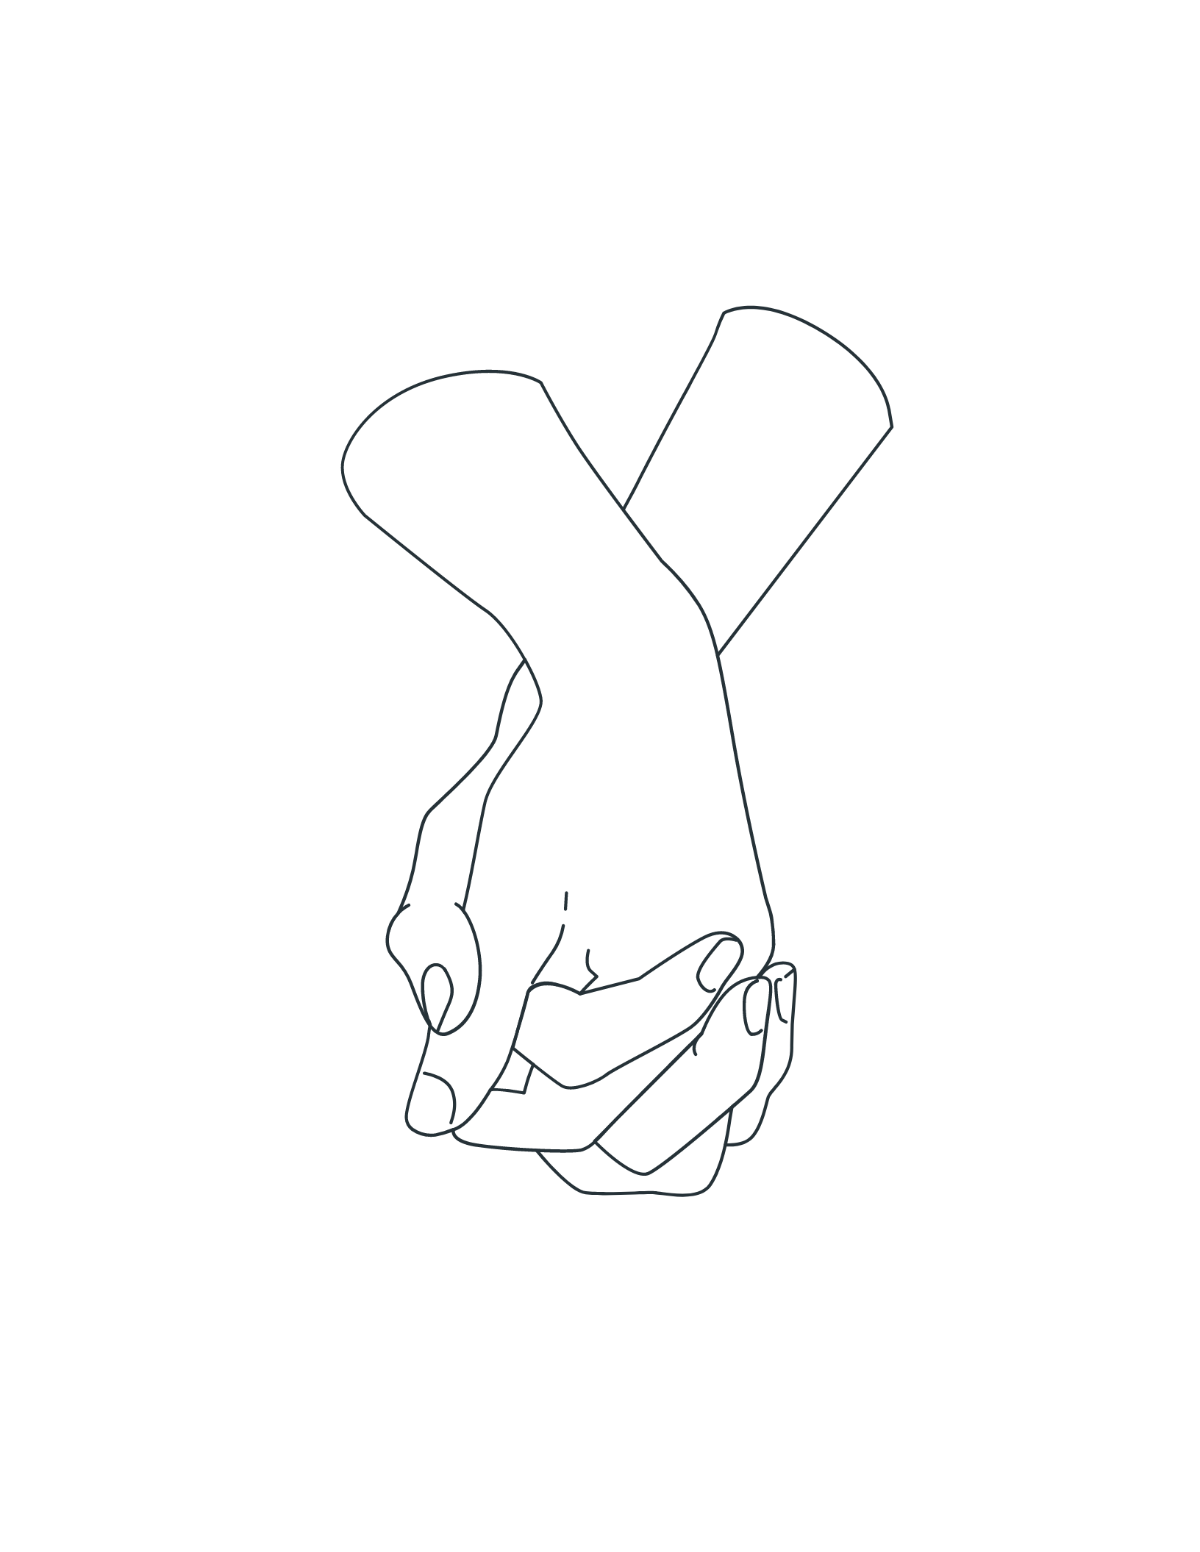 Wedding Holding Hands Coloring Page Template